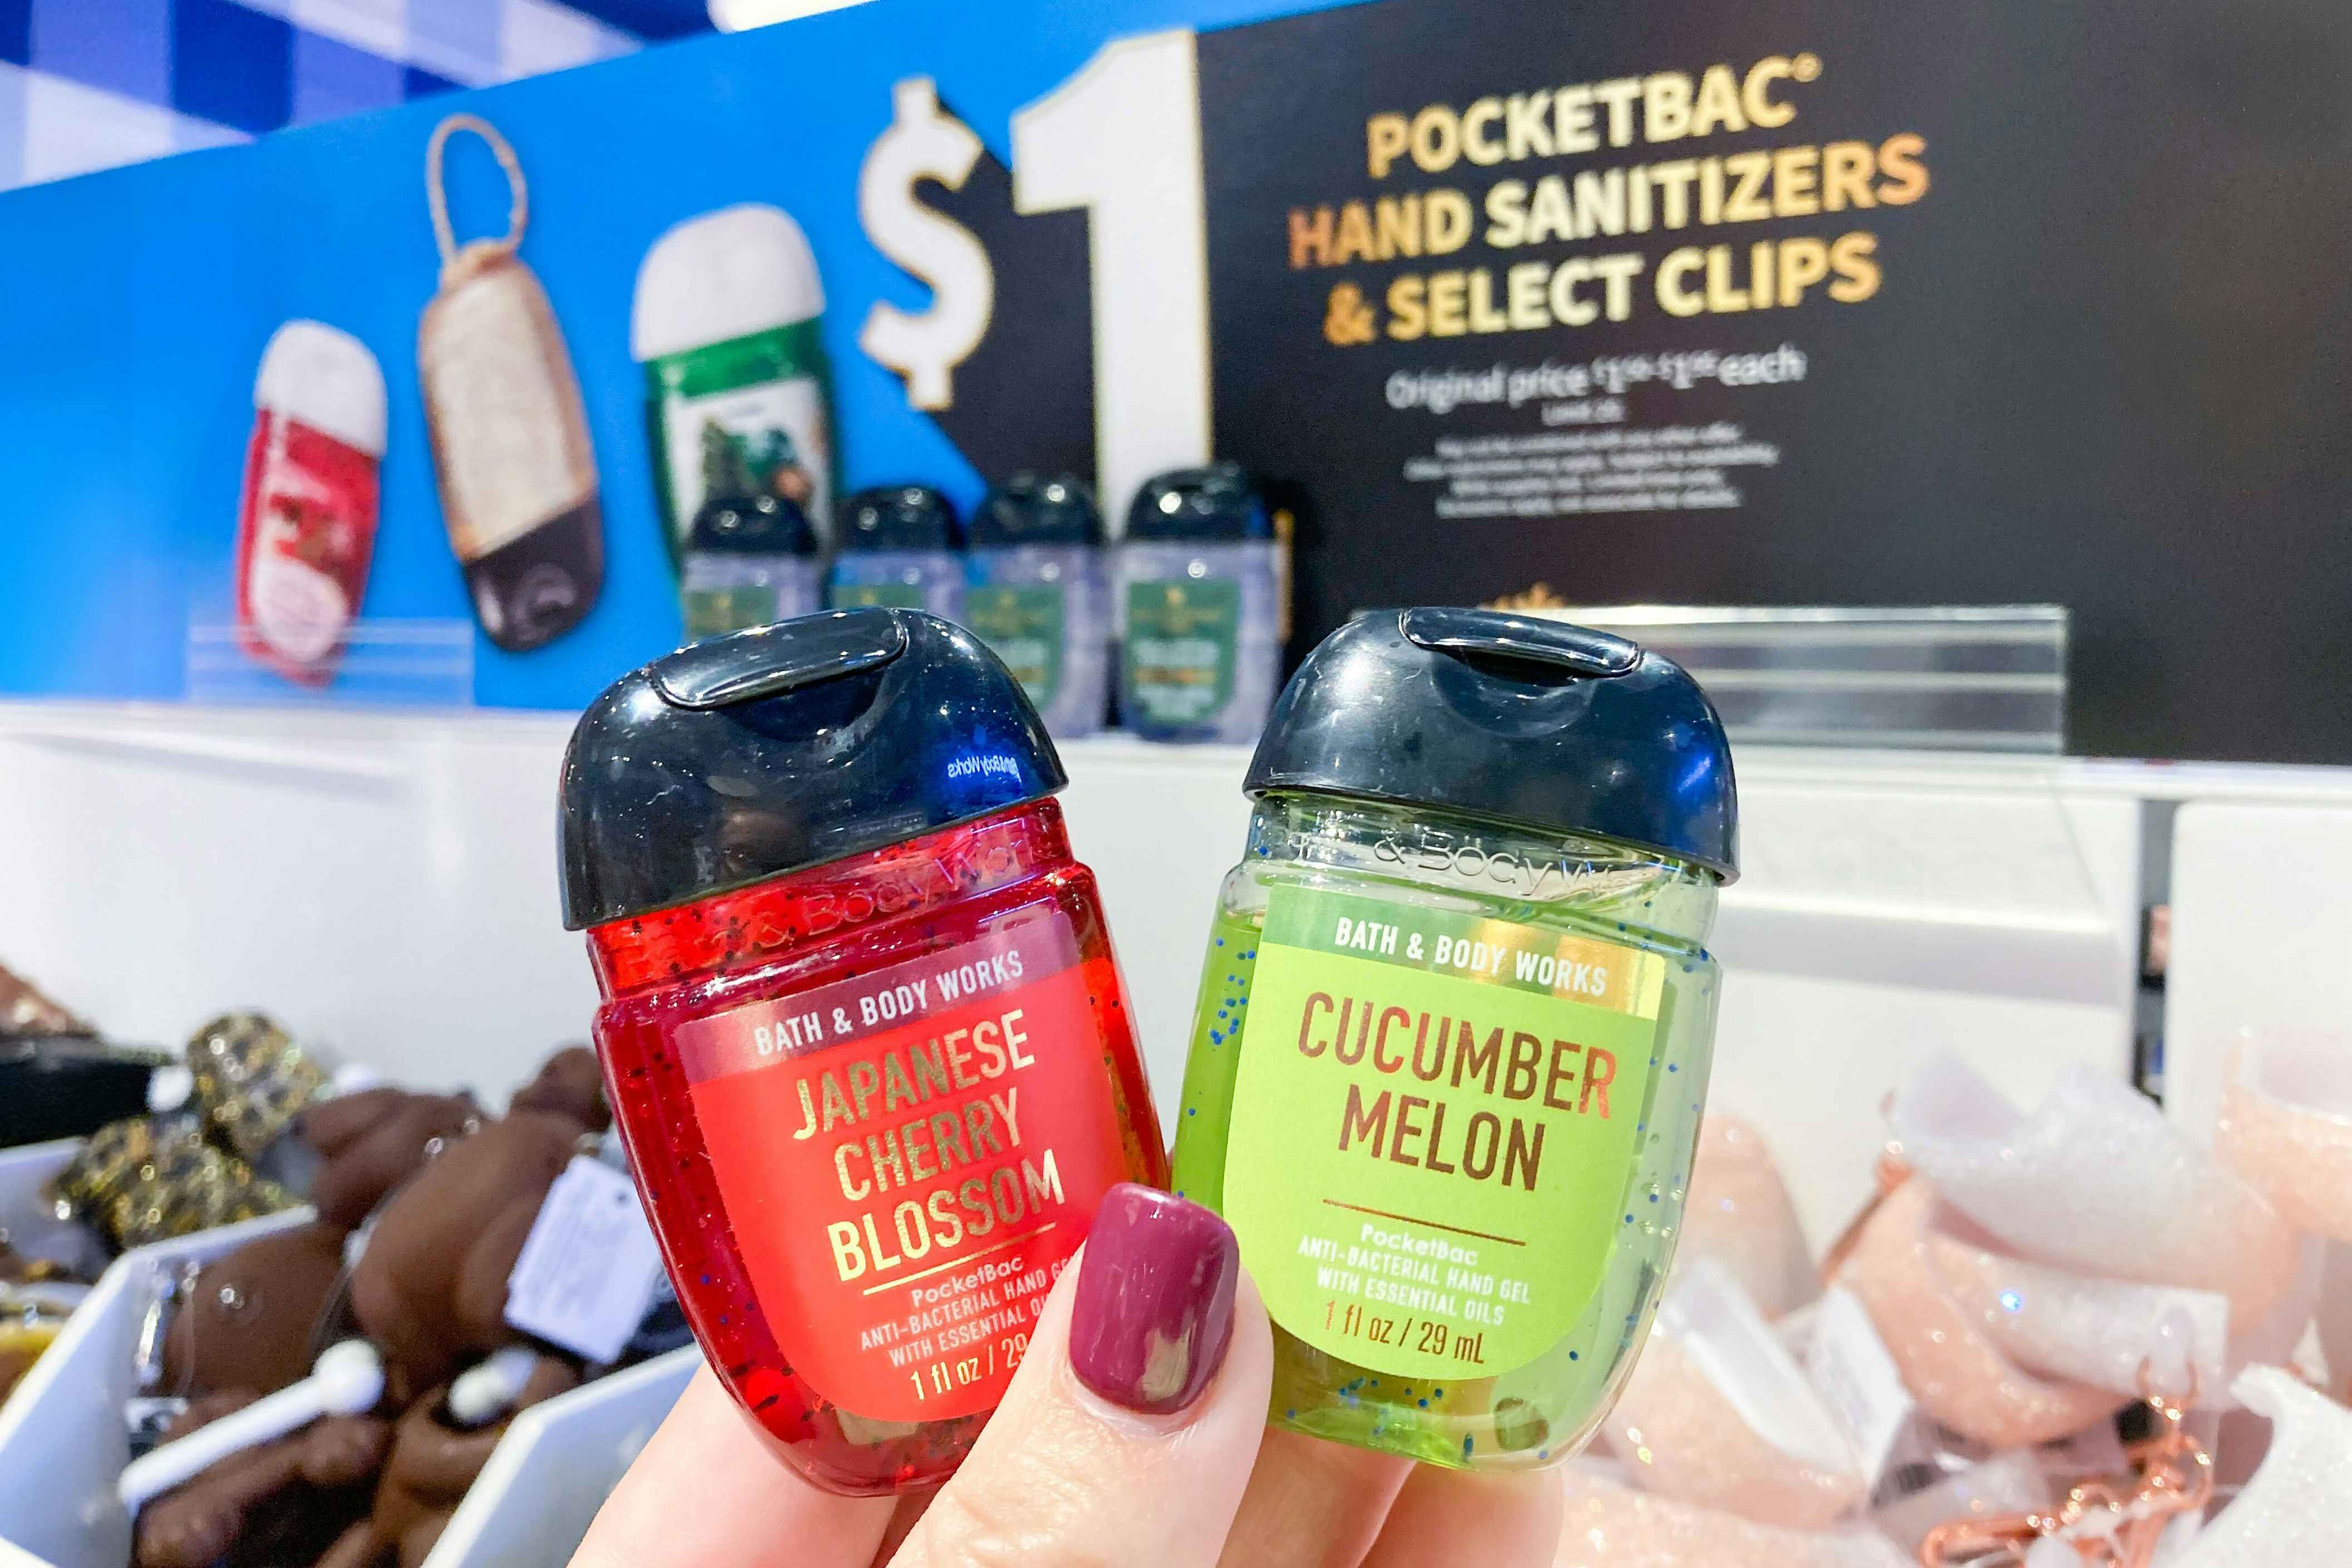 Bath & Body Works: $1 PocketBacs and Select Holders — One Day Only in Store